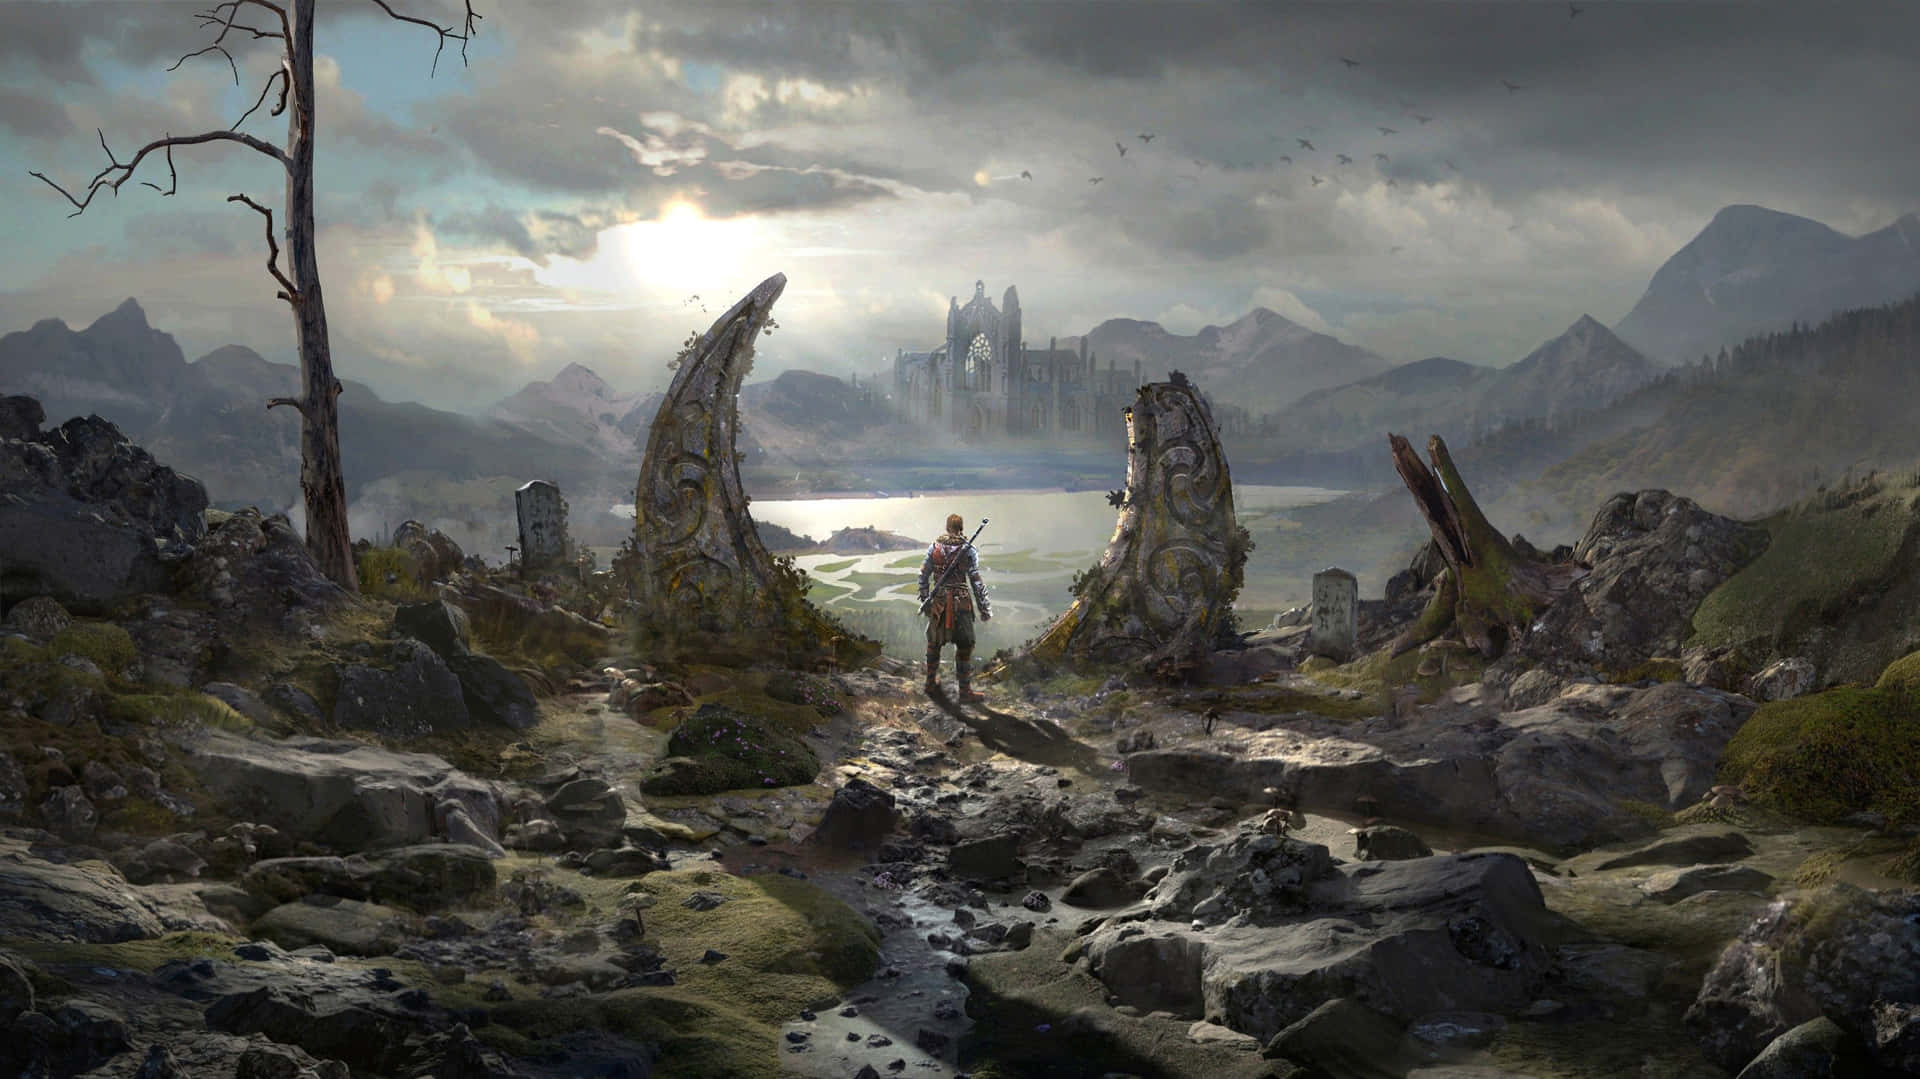 An epic, IMAX-worthy journey across the New World Wallpaper